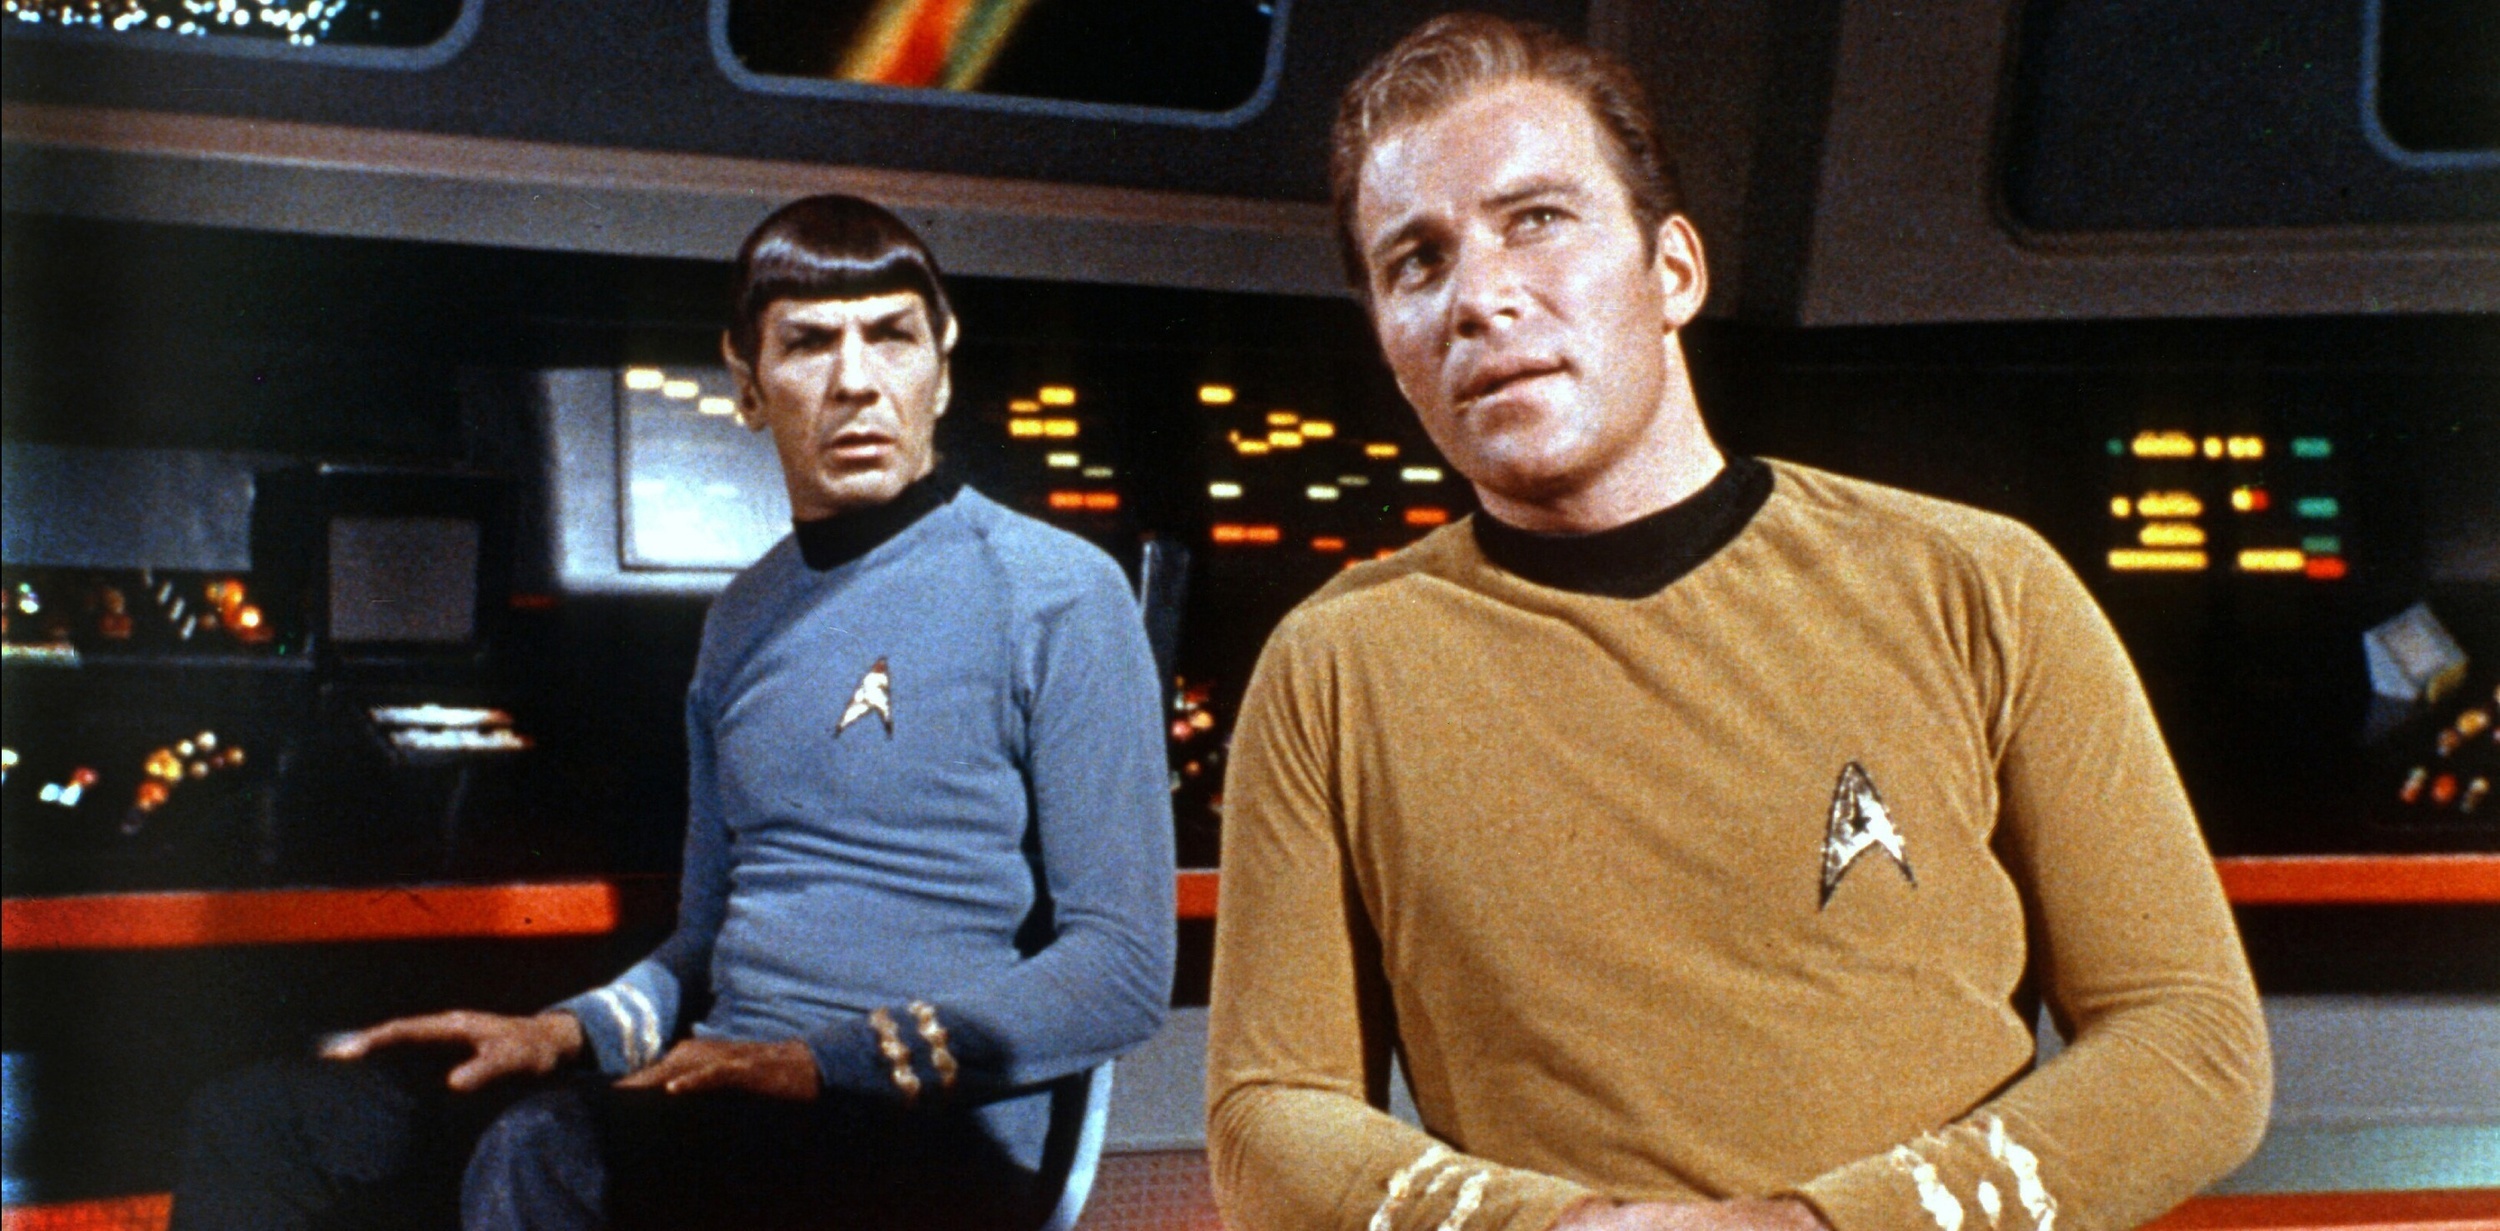 <p>If there’s one sci-fi series that looms above all others, it would have to be <span><em>Star Trek</em>. </span>Whether it’s the original series or its various successors, such as <span><em>The Next Generation</em>, </span>the series has always pushed the boundaries of what could be shown on television, particularly racial representation. What’s more, the series has always tried to envision a more positive and benevolent future, which is in marked contrast to the pessimism so often on offer in the sci-fi genre. In the world of <span><em>Star Trek</em>, </span>there is always hope, and this helps to explain why it remains so beloved.</p><p>You may also like: <a href='https://www.yardbarker.com/entertainment/articles/20_movies_you_probably_didnt_know_were_remakes_020424/s1__38707126'>20 movies you probably didn't know were remakes</a></p>